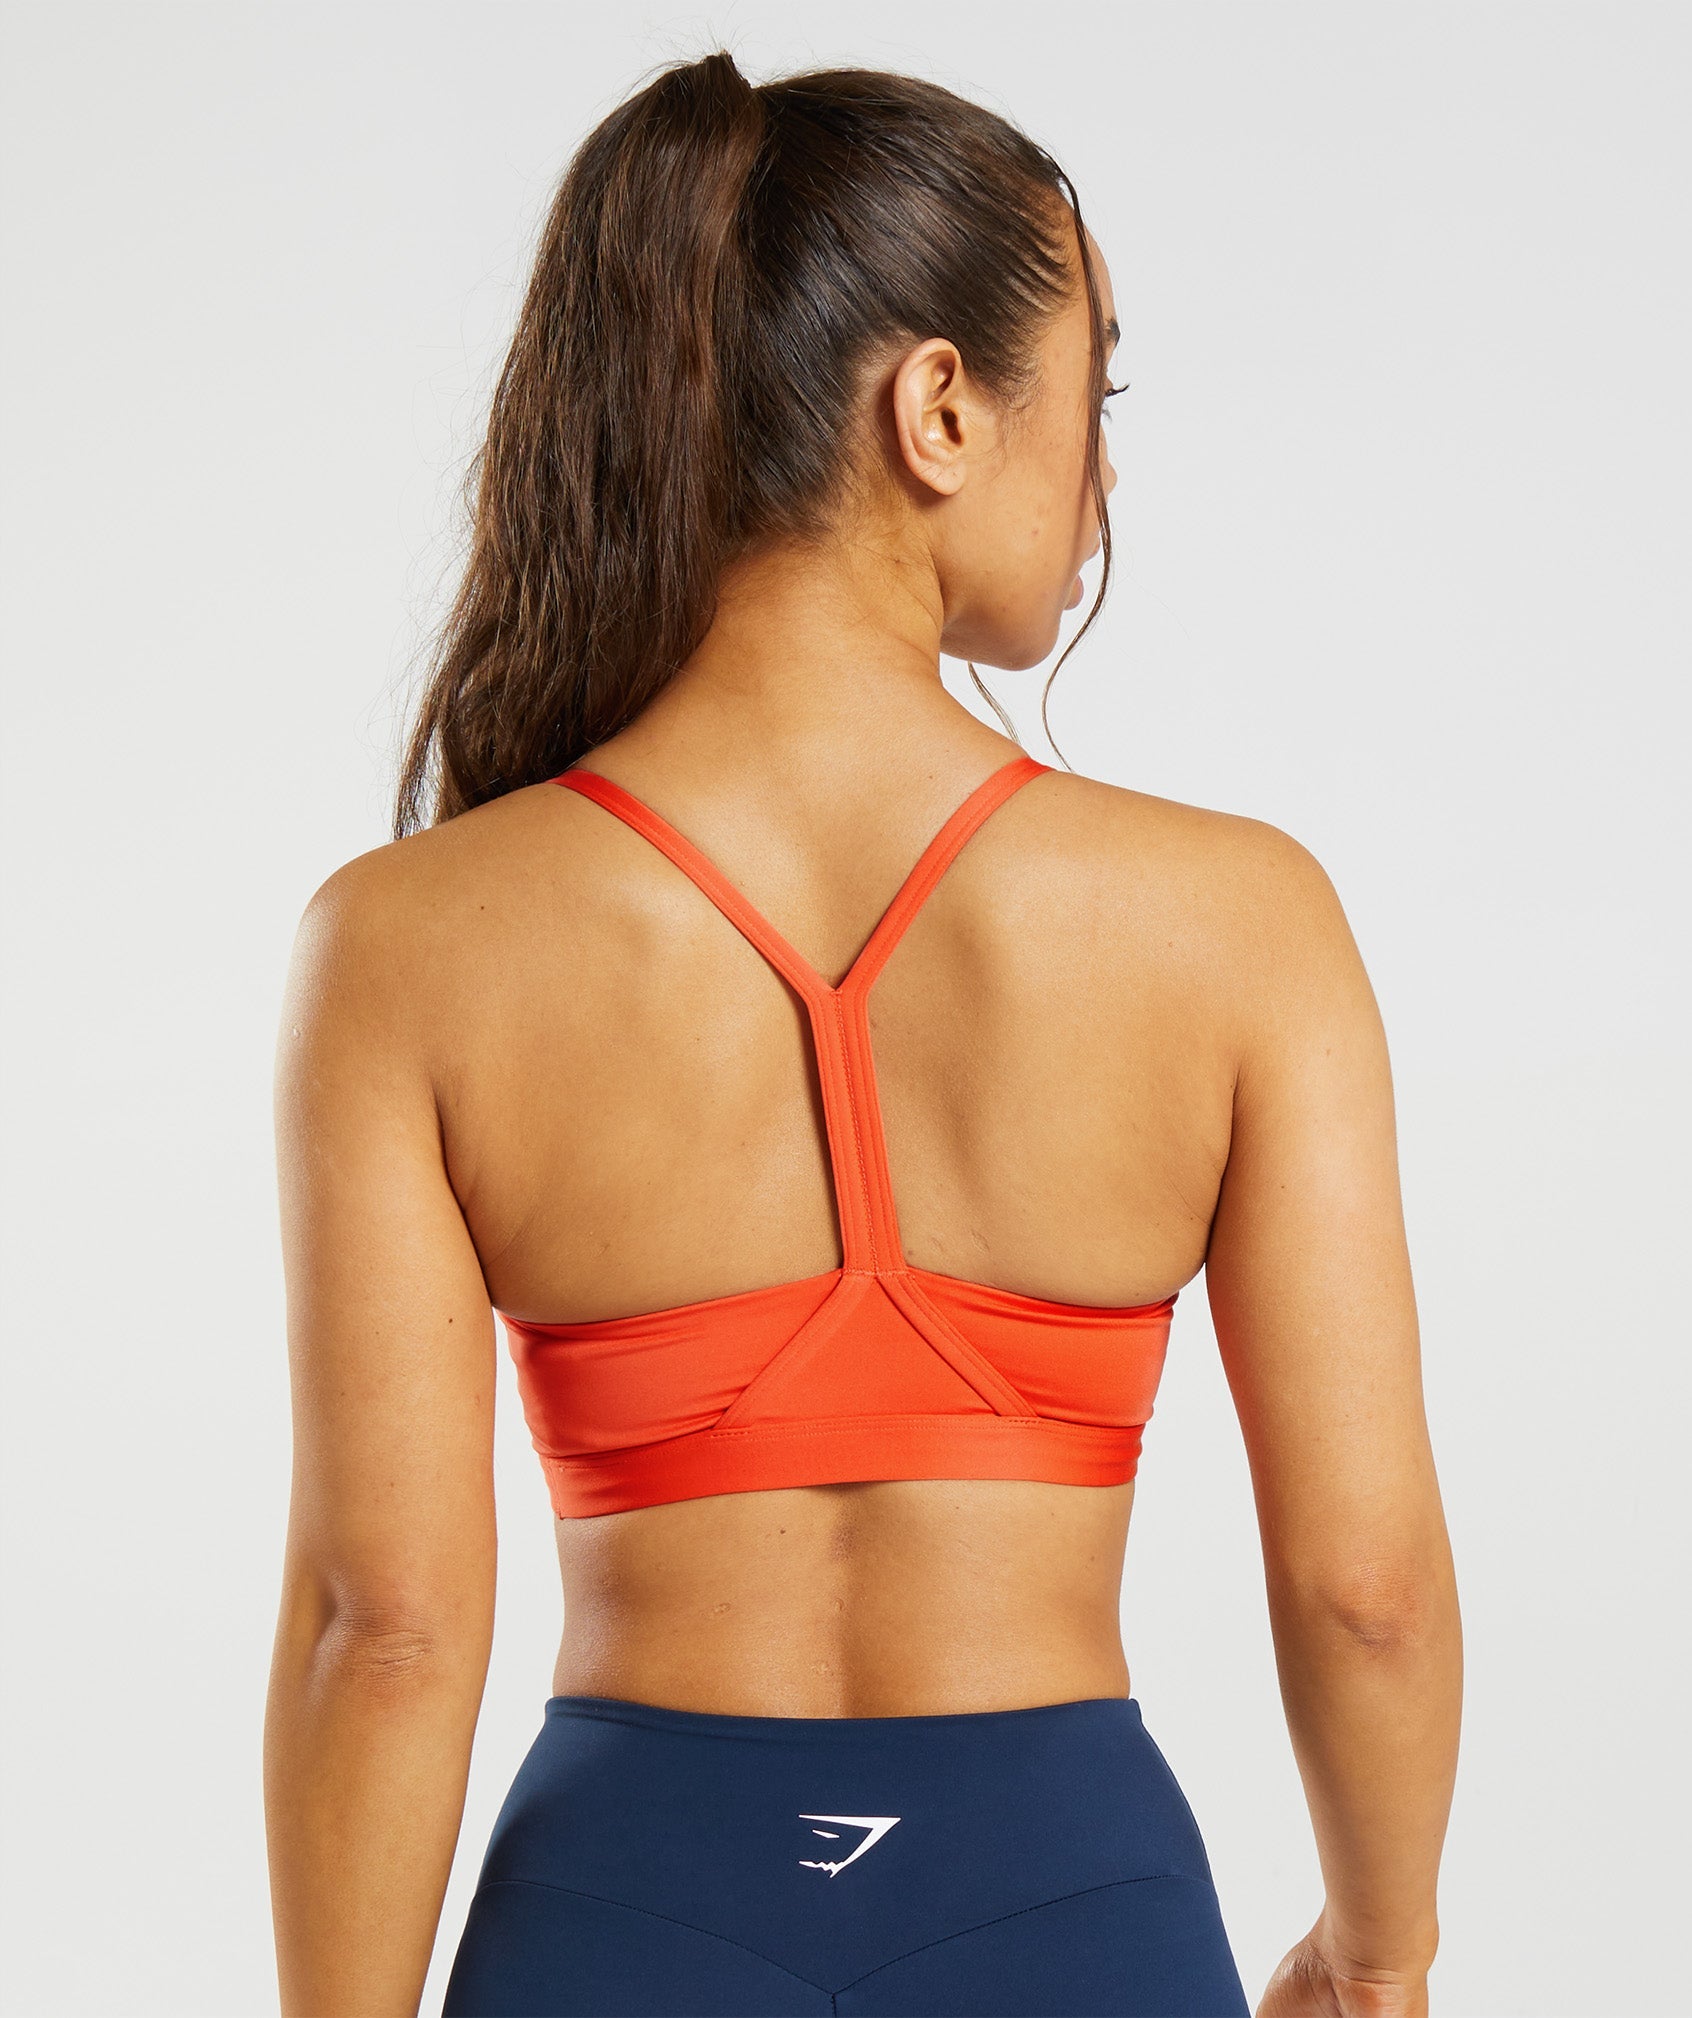 Gymshark V Neck Sports Bra Blue - $25 (28% Off Retail) - From Paige